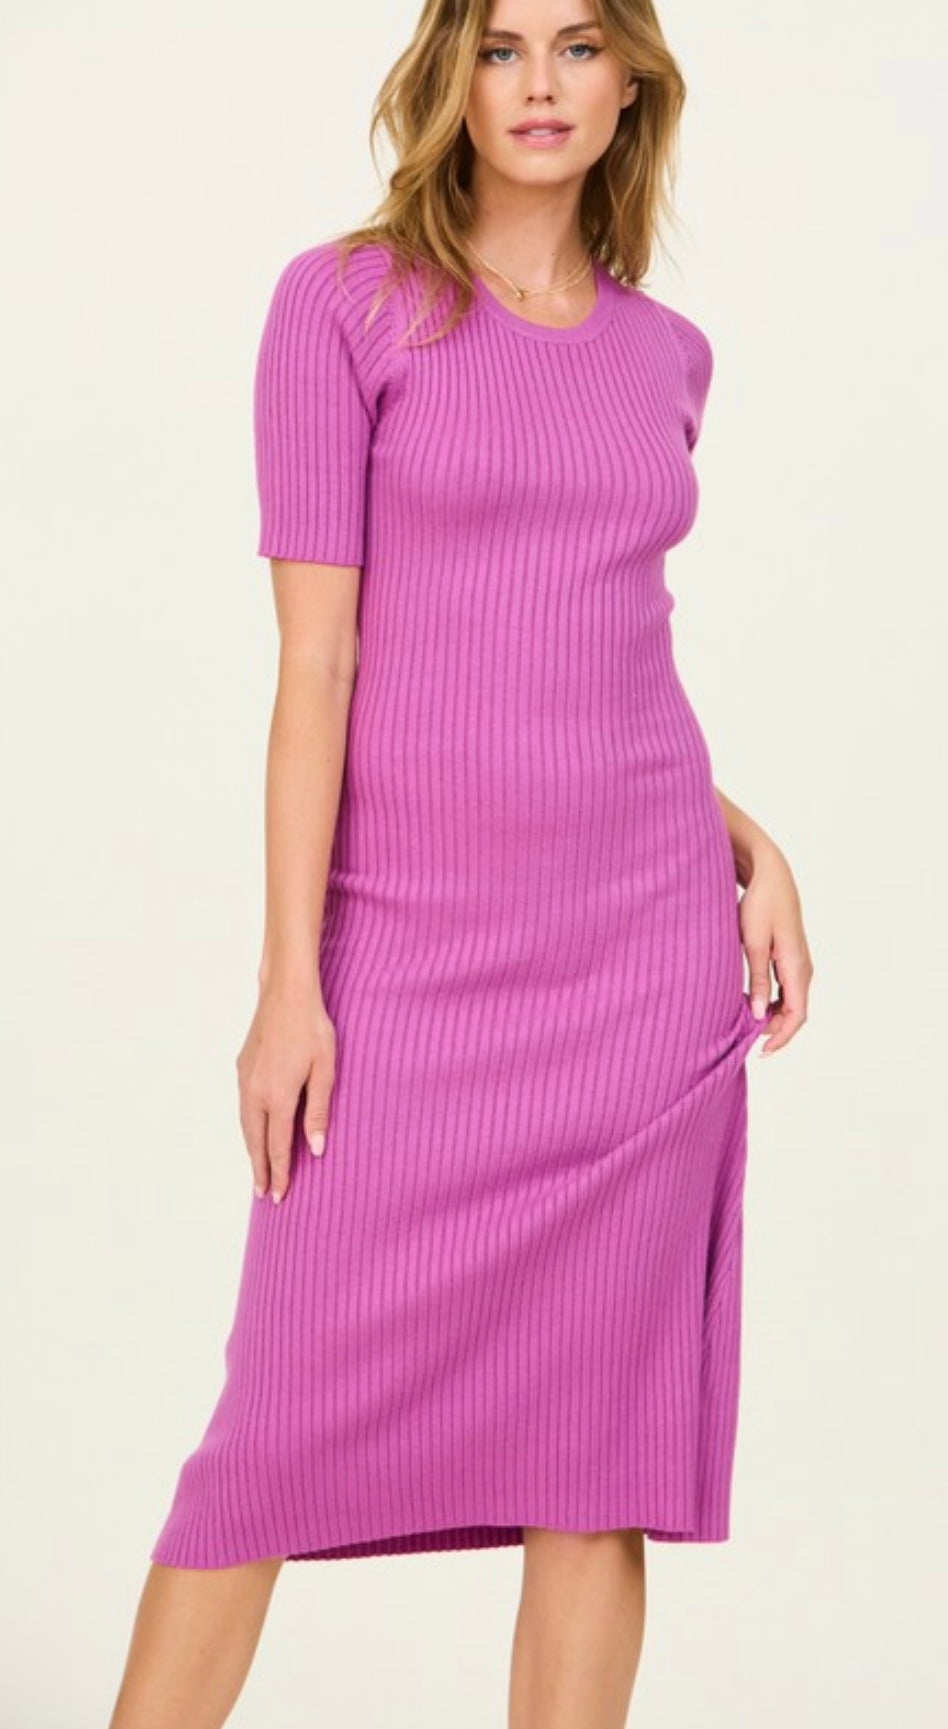 The Maddie Pink Ribbed Dress